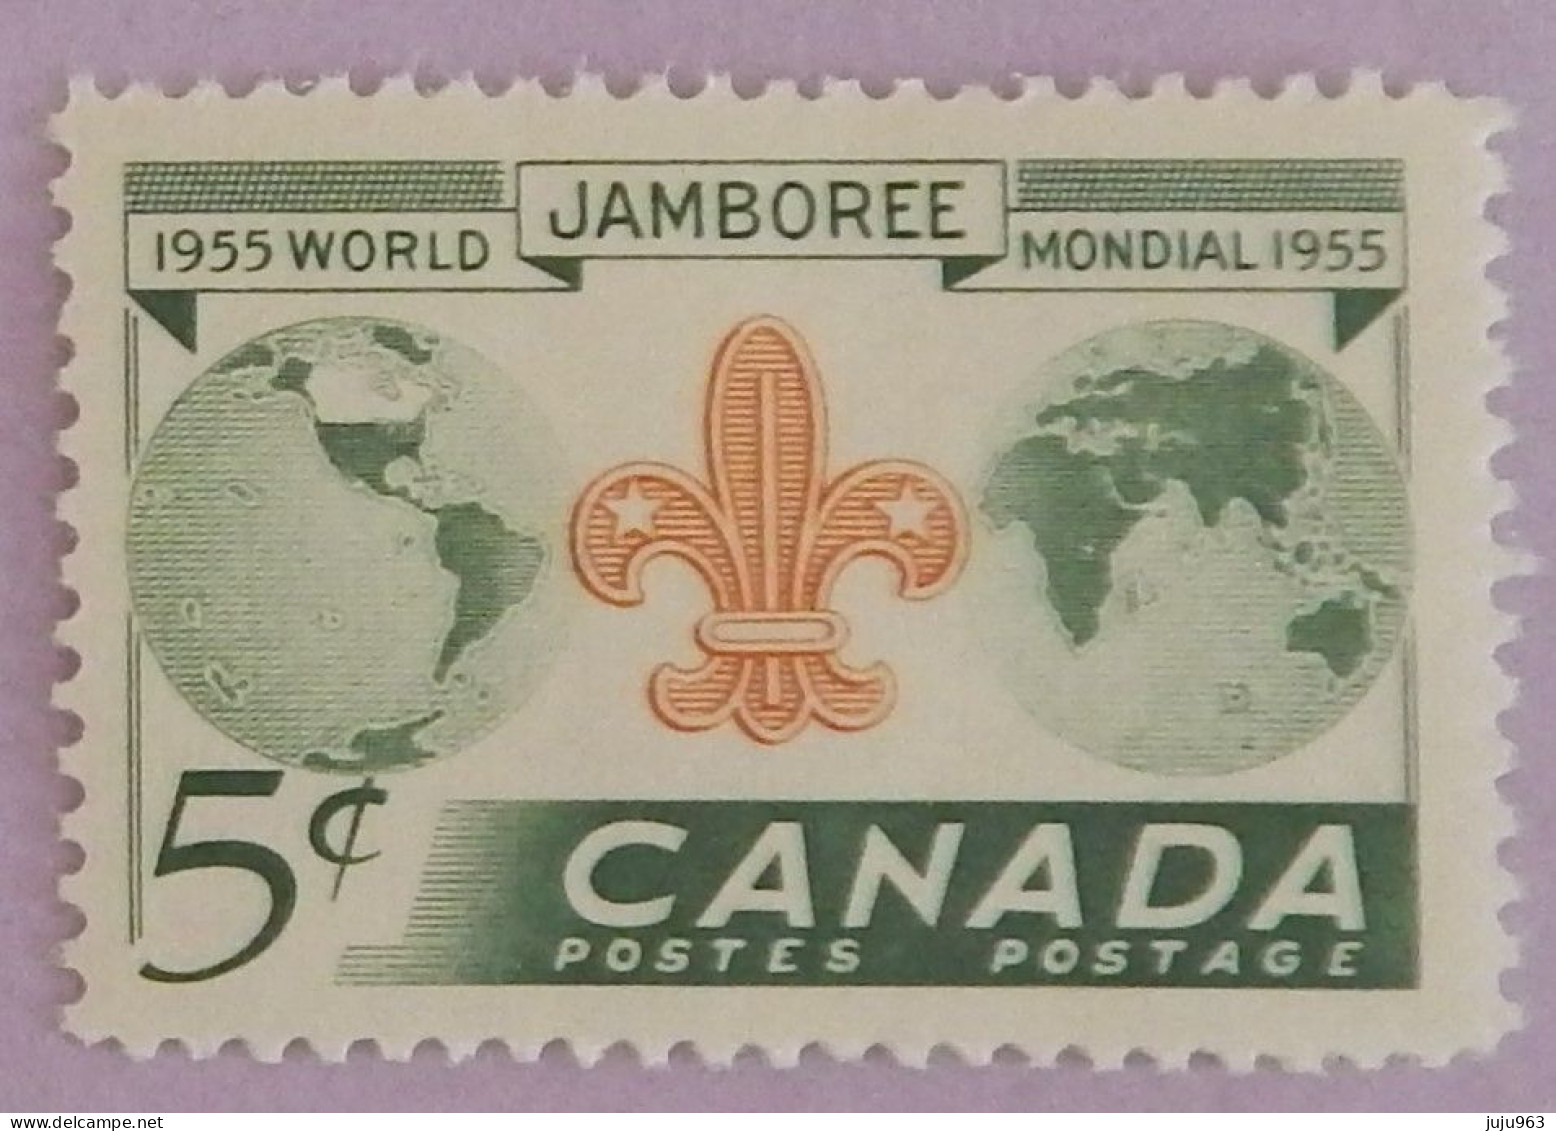 CANADA YT 283 NEUF**MNH" SCOUTISME" ANNÉE 1955 - Used Stamps